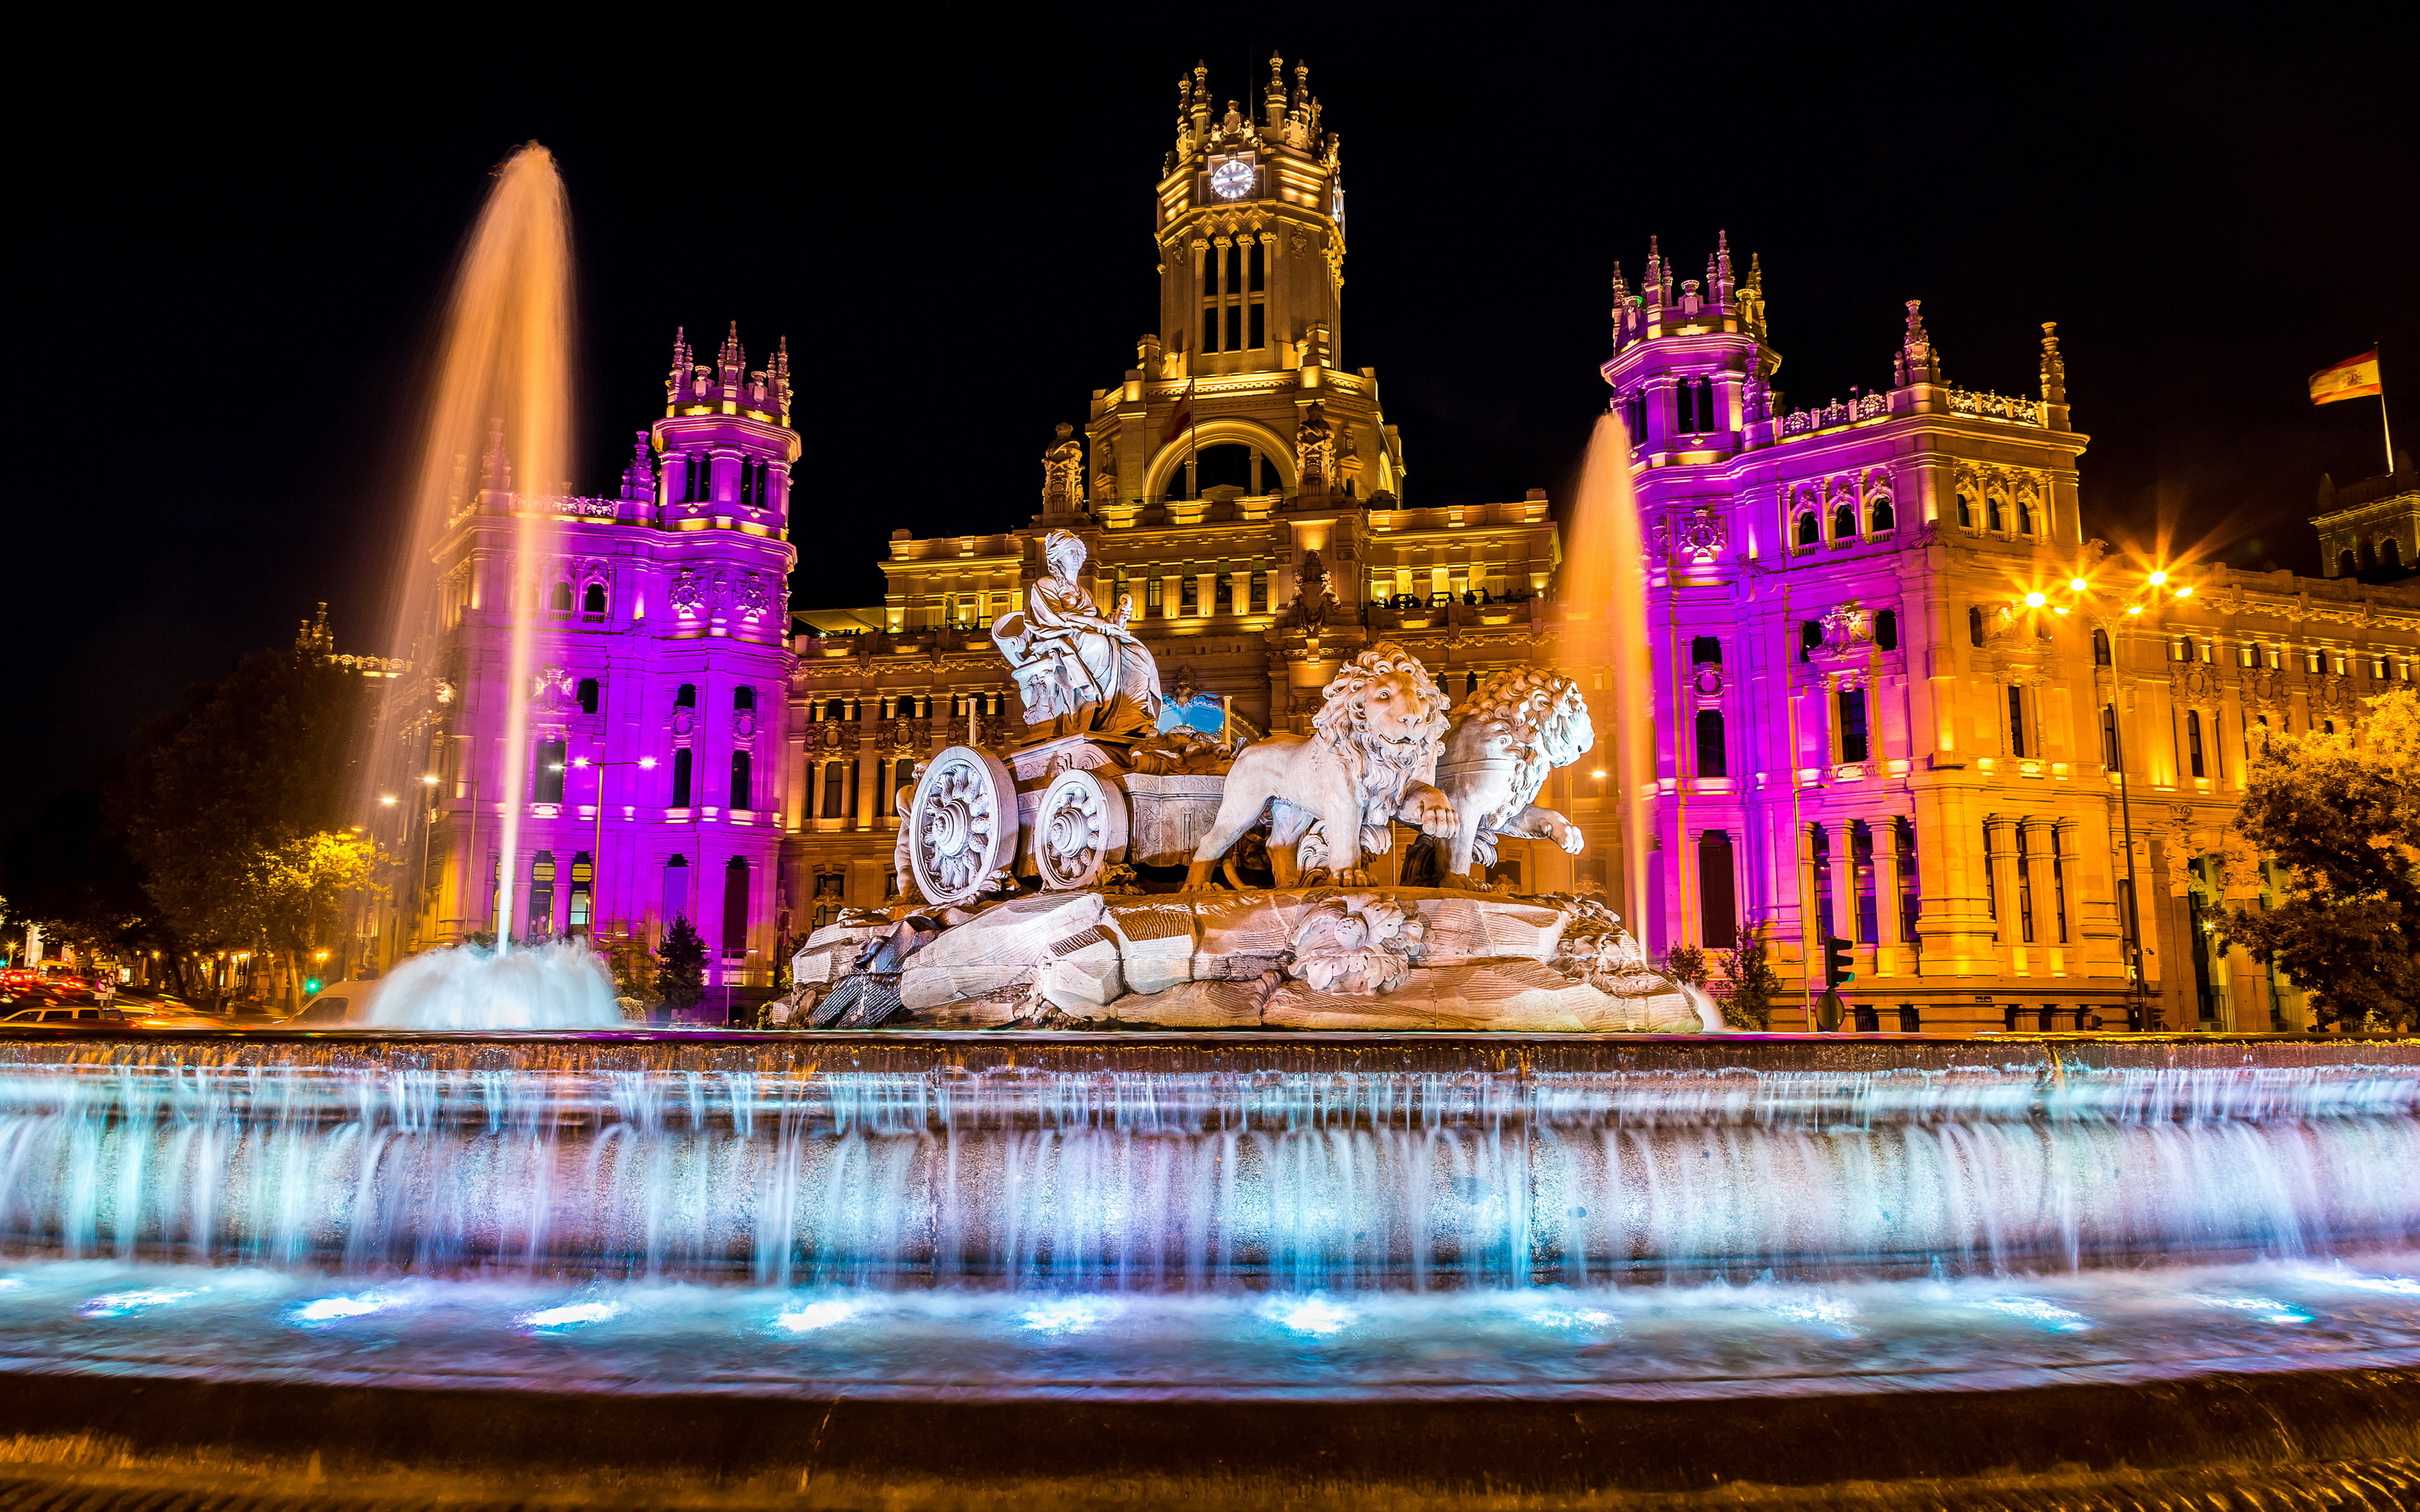 Beautiful Fountain With A Statue Of The Roman Goddess Sibele  Plaza De Cibeles Madrid Spain Desktop Hd Wallpapers For Mobile Phones And Computer 3840×2400